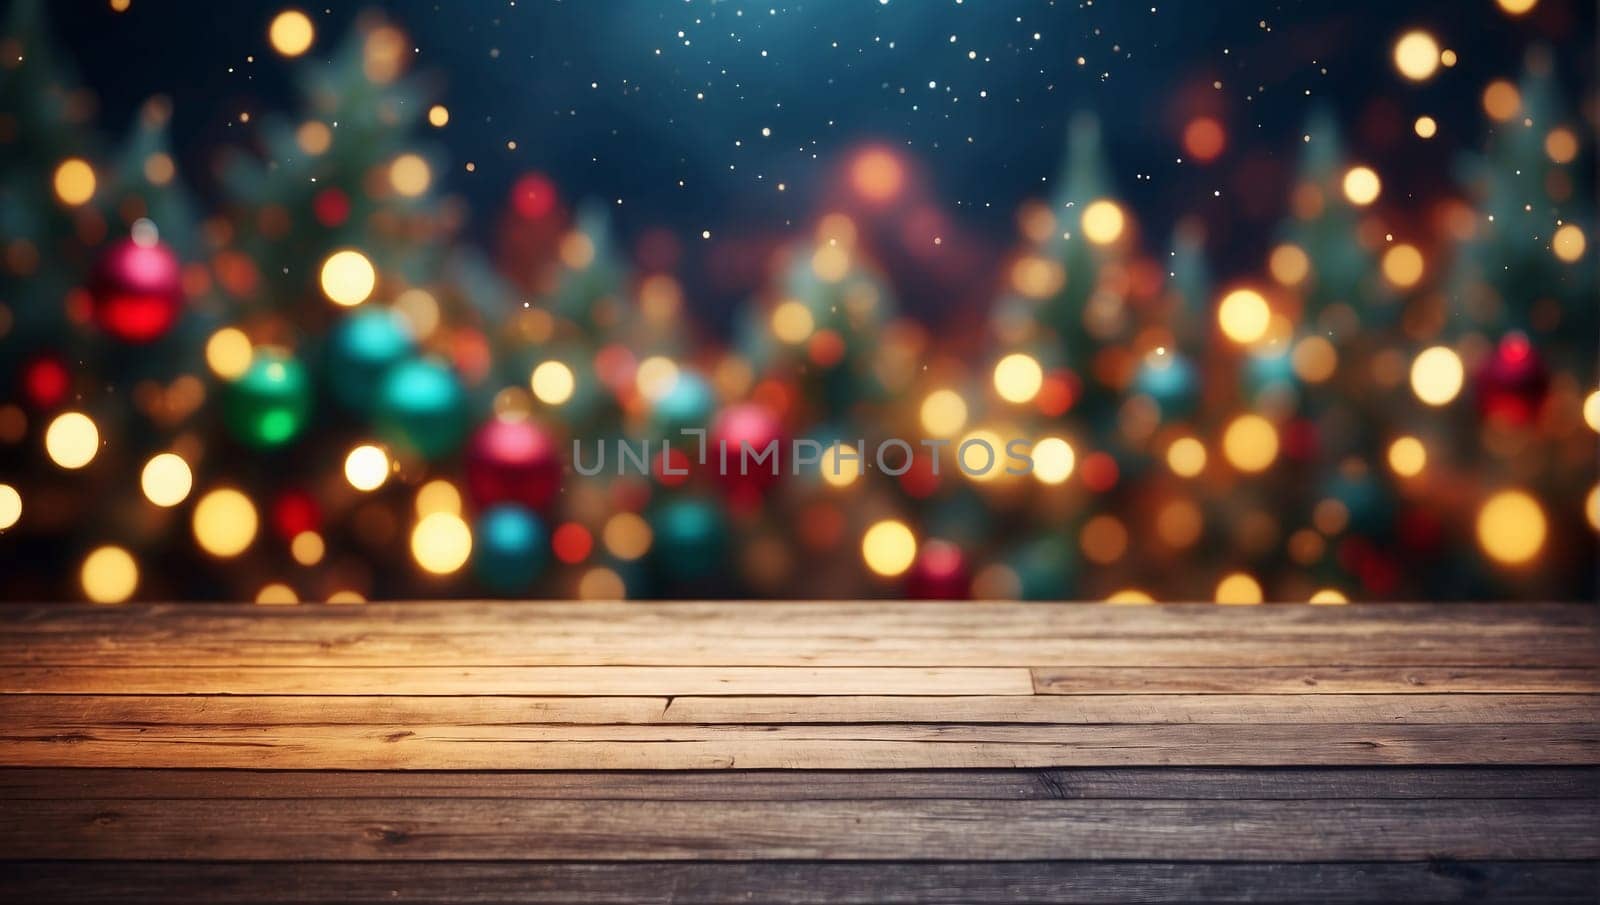 Empty table in front of christmas tree with decorations background. For product display montage by bizzyb0y